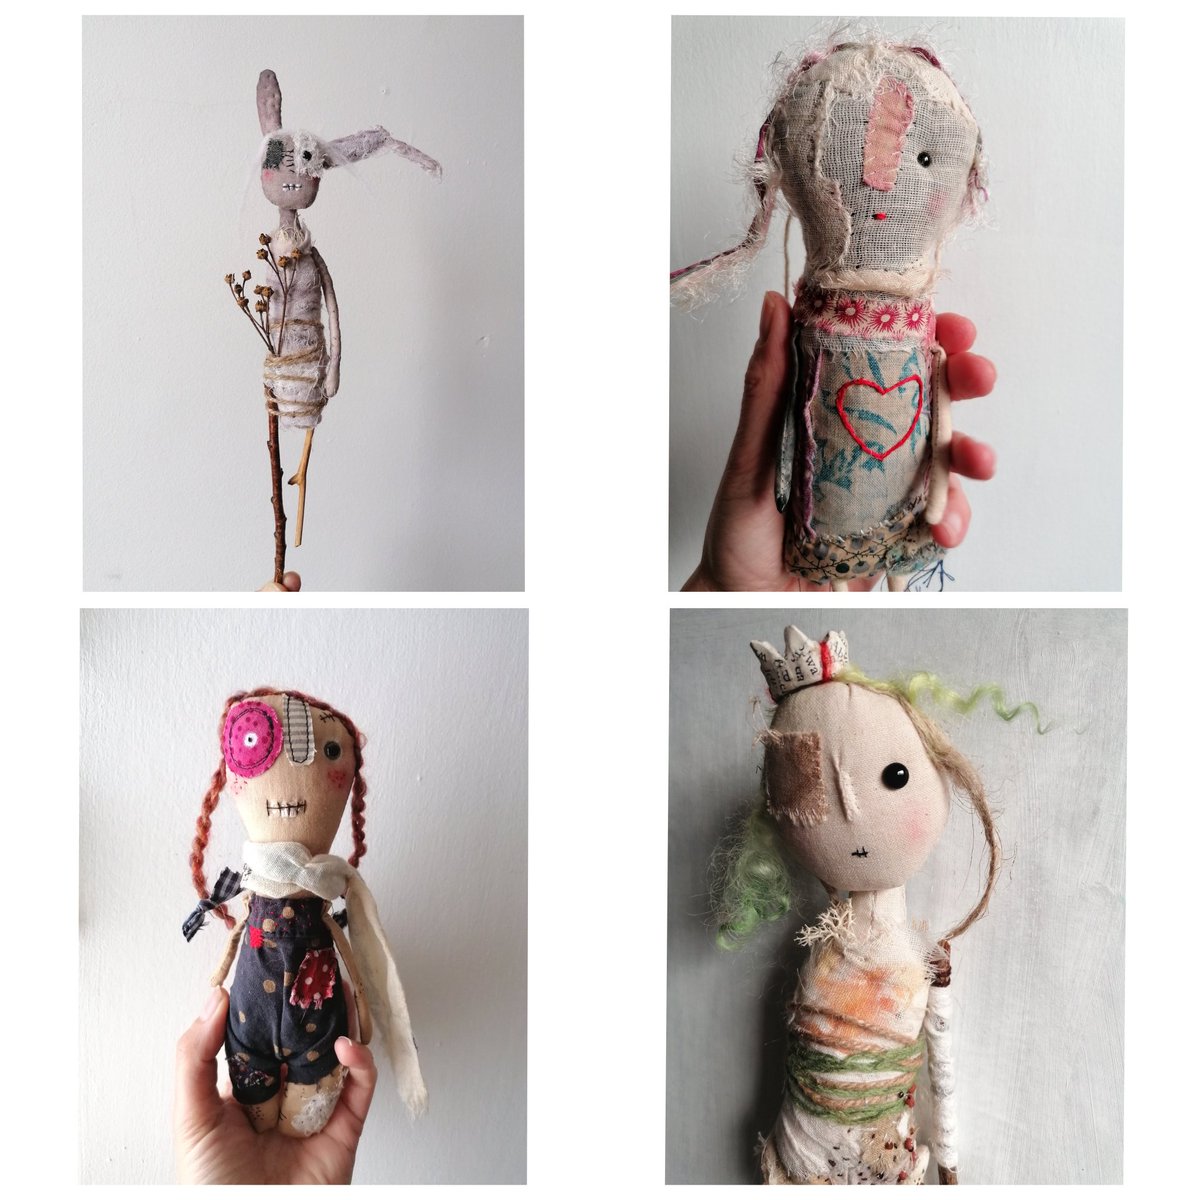 I have to get things moving if I want to keep doing this job a bit longer so offering 10% off on all my dolls ❤️They are handmade, designed to look wonderfully weird and perfectly imperfect. 😊 Apply Spring24 at checkout. littlebirdofparadise.bigcartel.com #earlybiz #mhhsbd #CraftBizParty